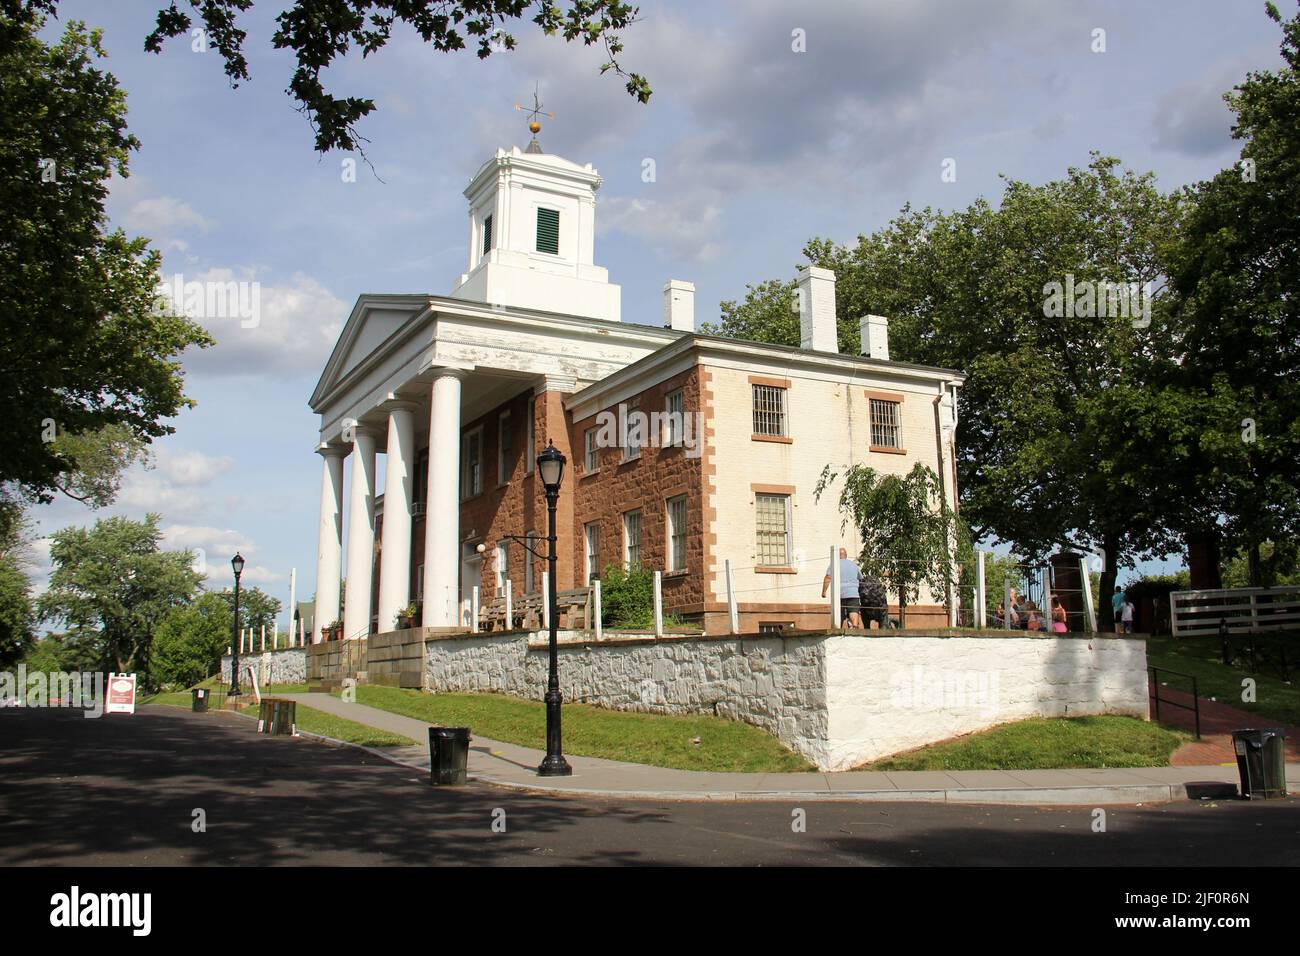 Third County Court House, 1837 Greek Revival building, at Historic Richmond Town, Staten Island, NY, USA Stock Photo